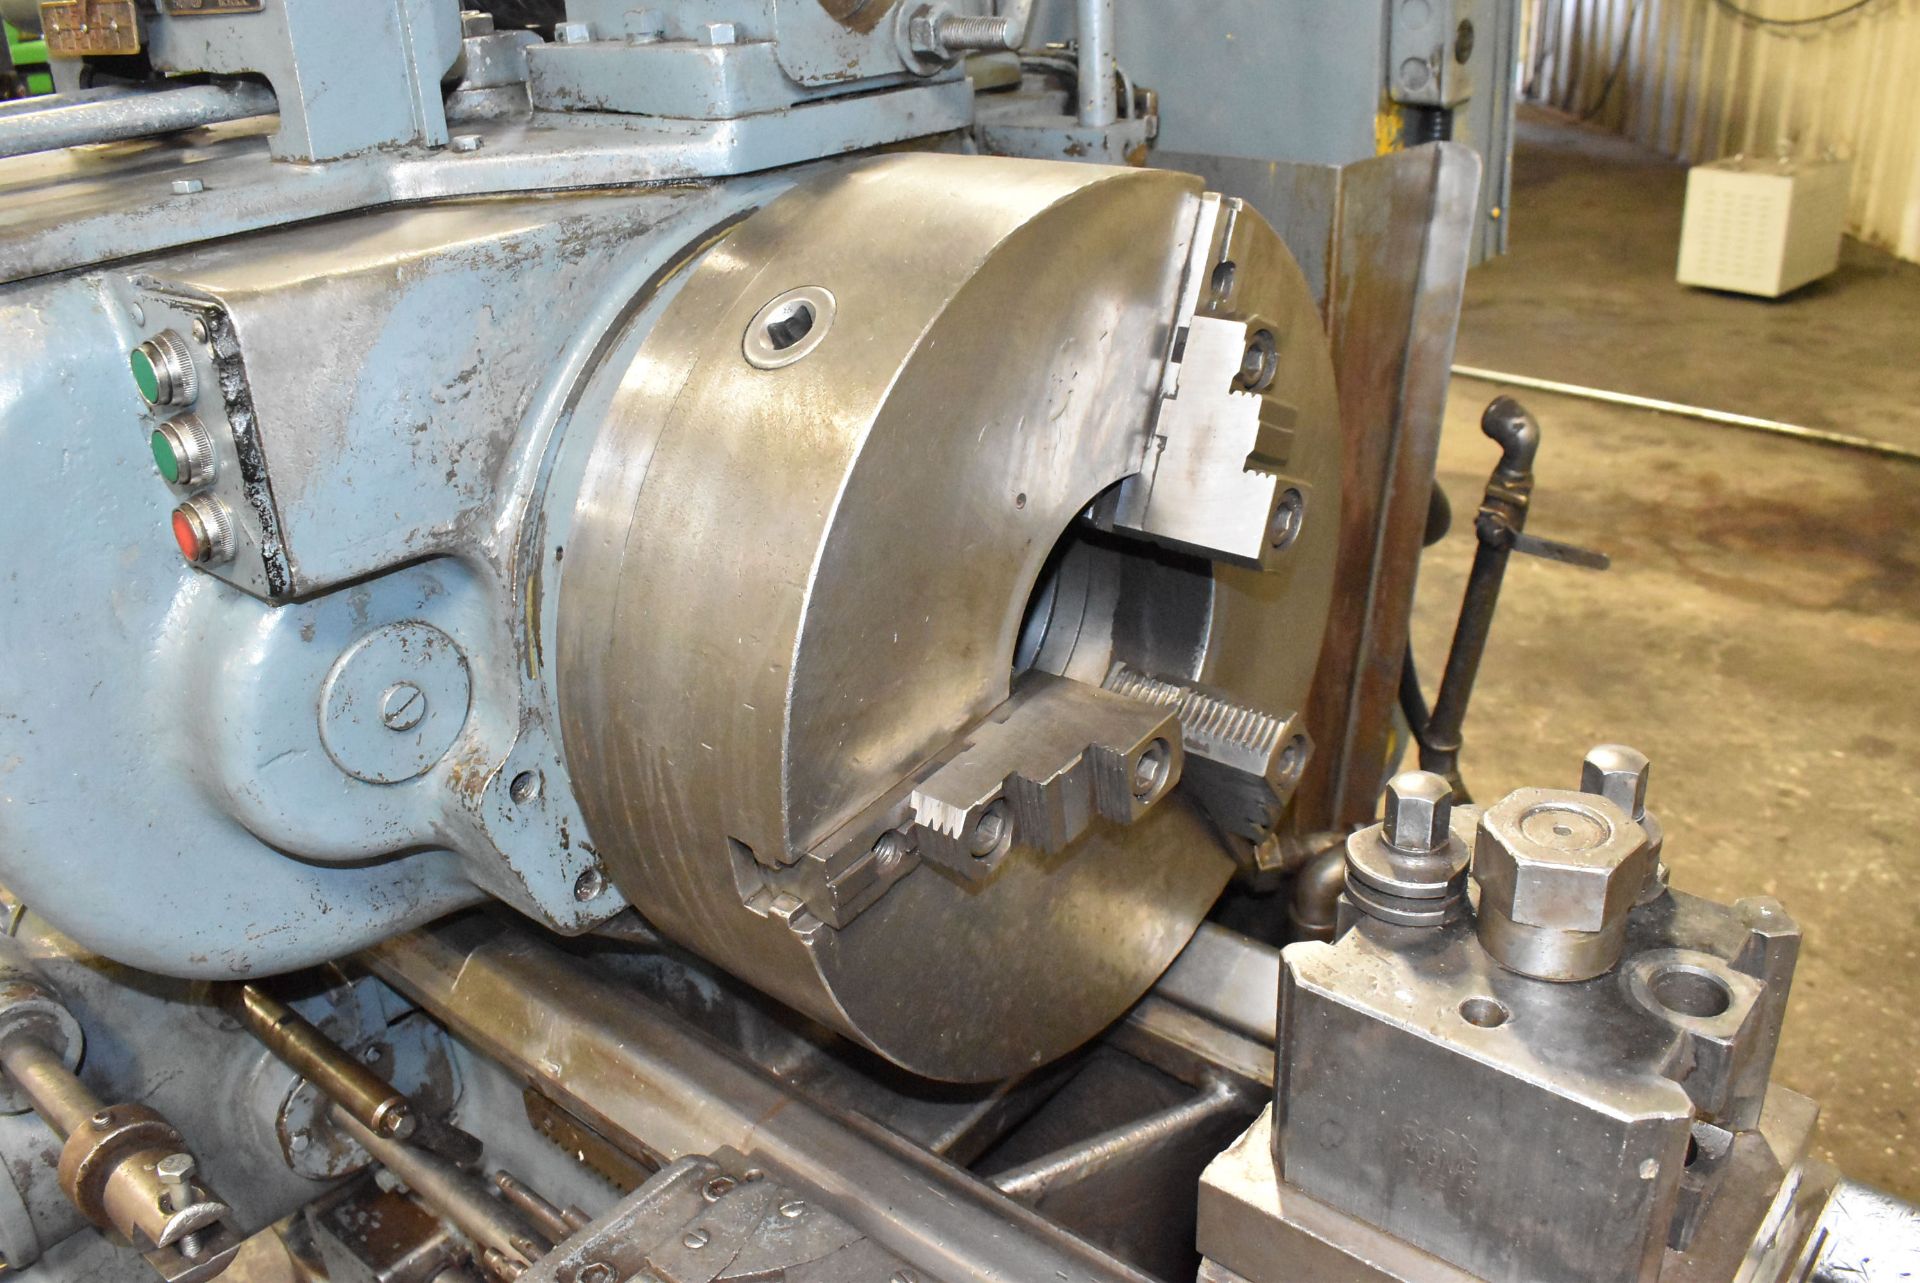 WARNER & SWASEY 3A TURRET LATHE WITH 24" SWING OVER BED, 52" DISTANCE BETWEEN CENTERS, 6.25" SPINDLE - Image 4 of 9